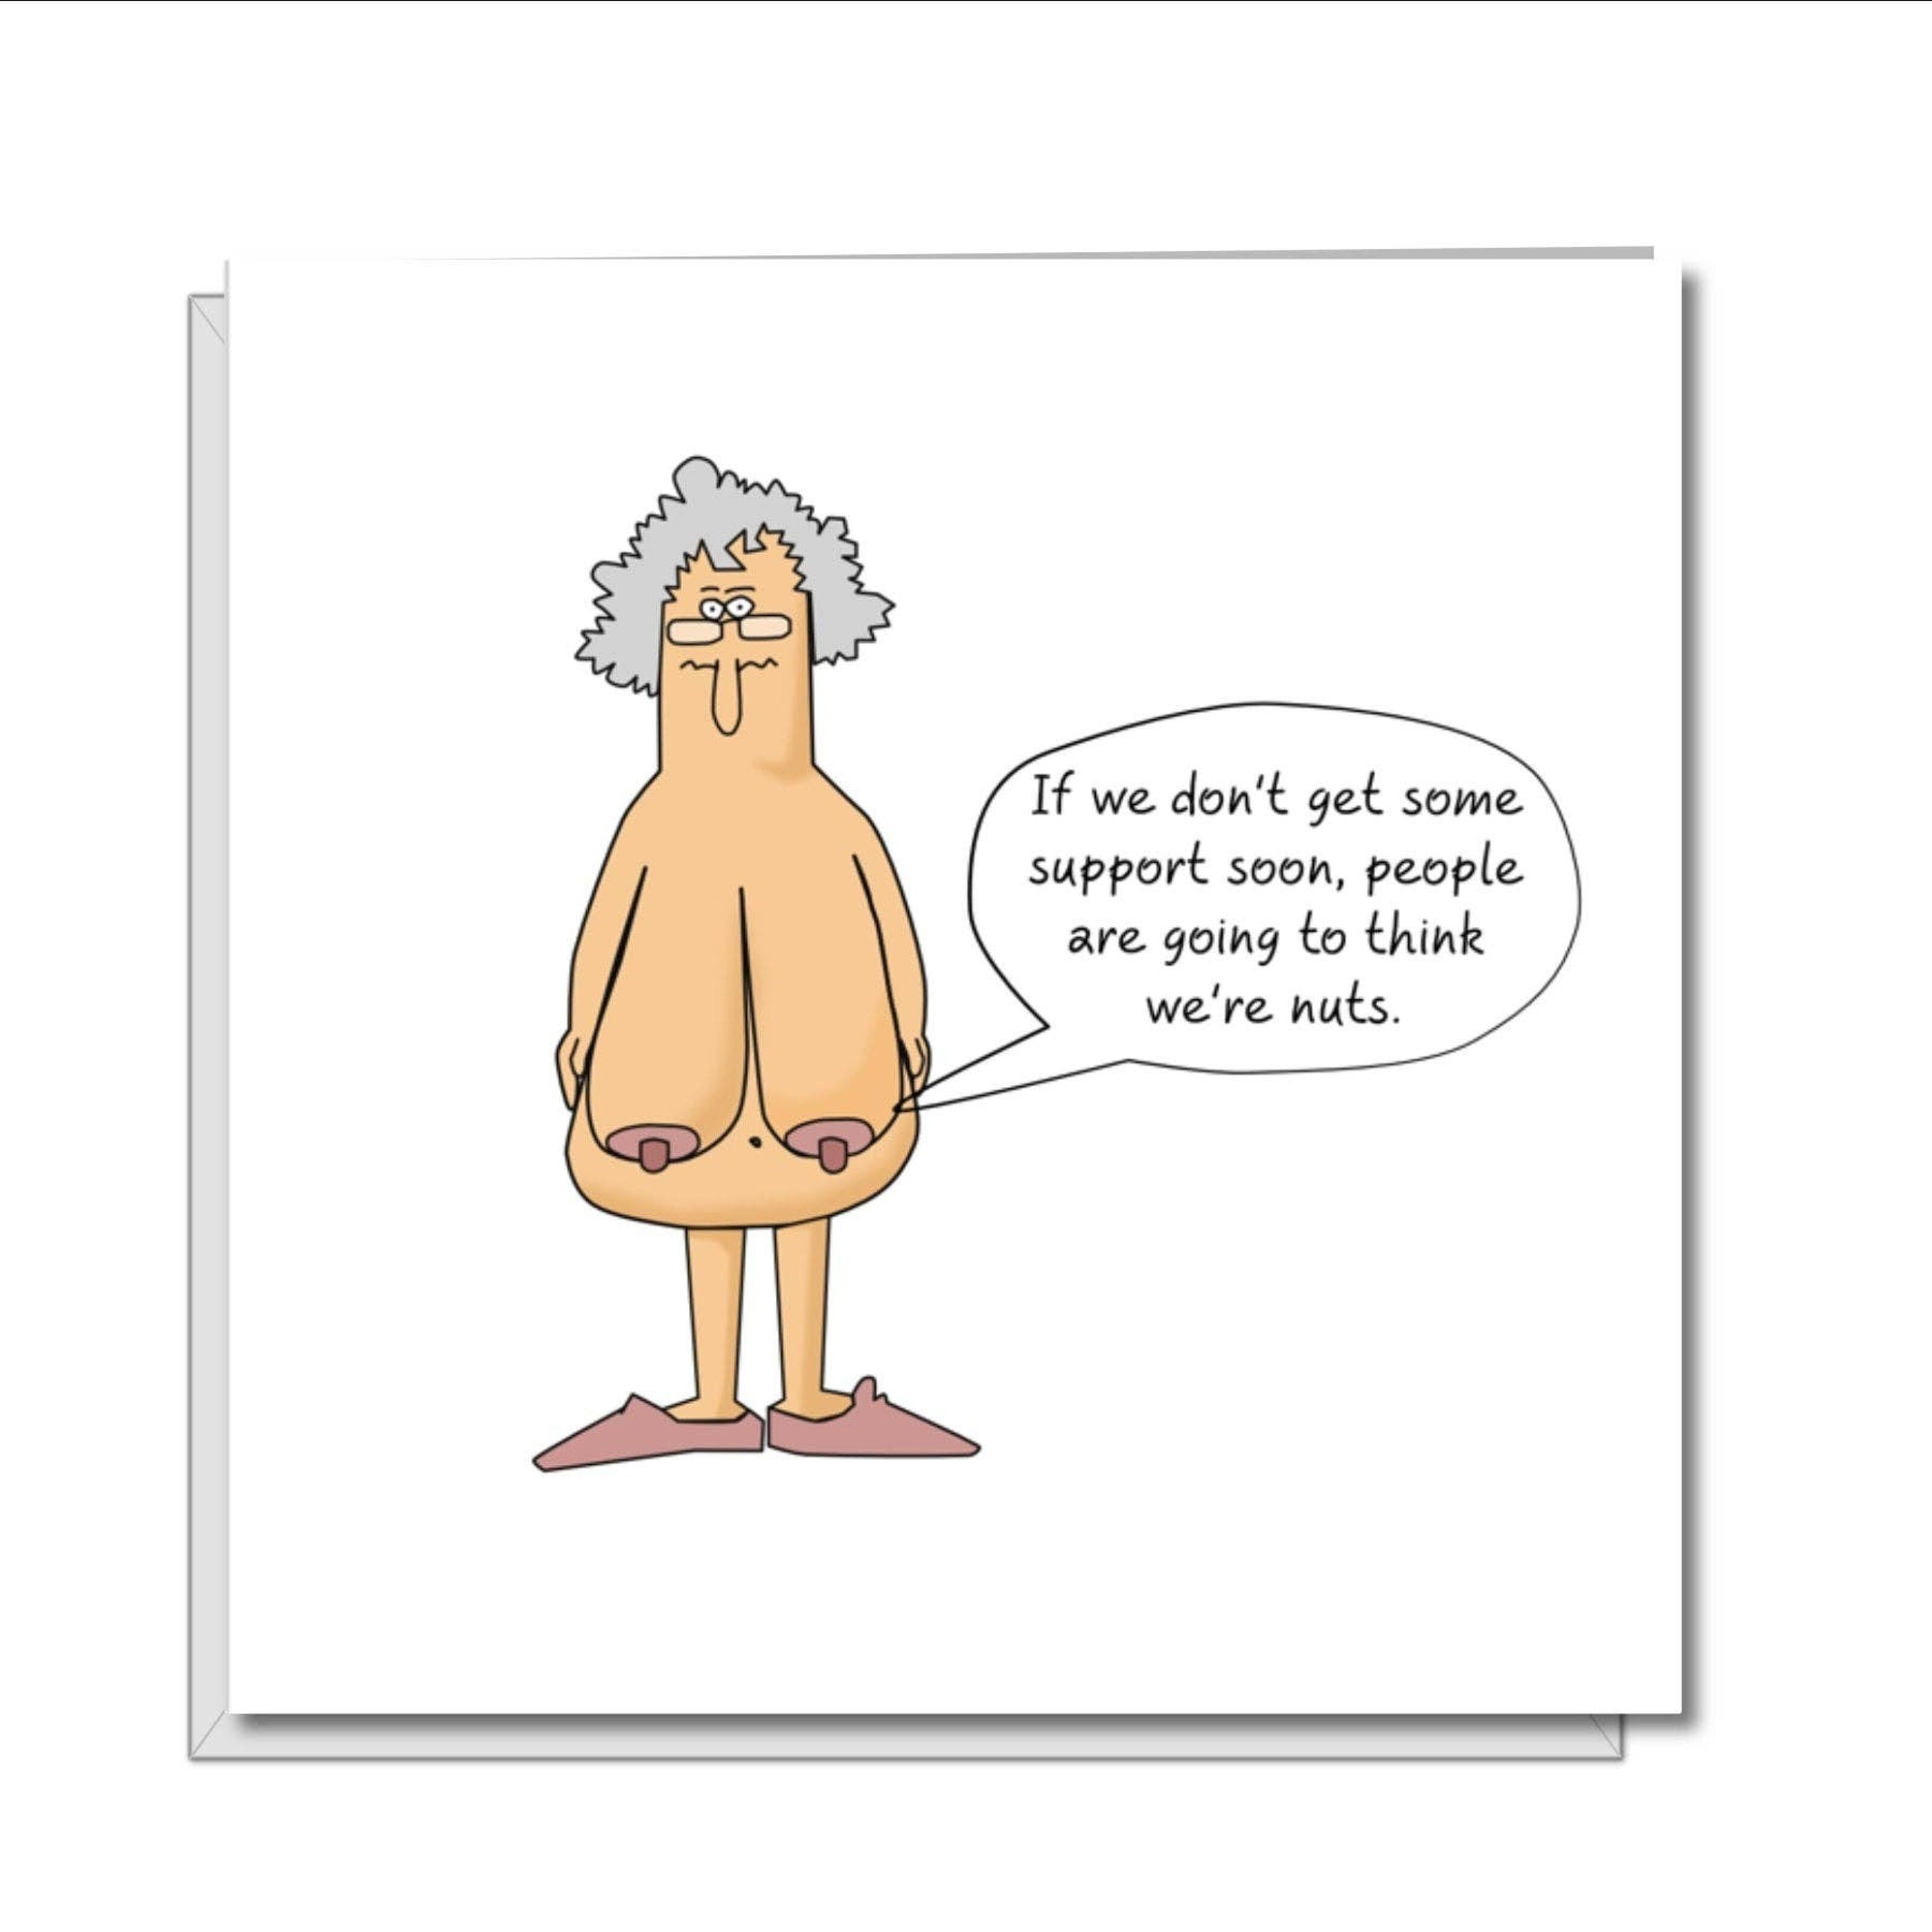 Funny 30th Birthday Card For Women - Saggy Boobs Card Sleazy Greetings